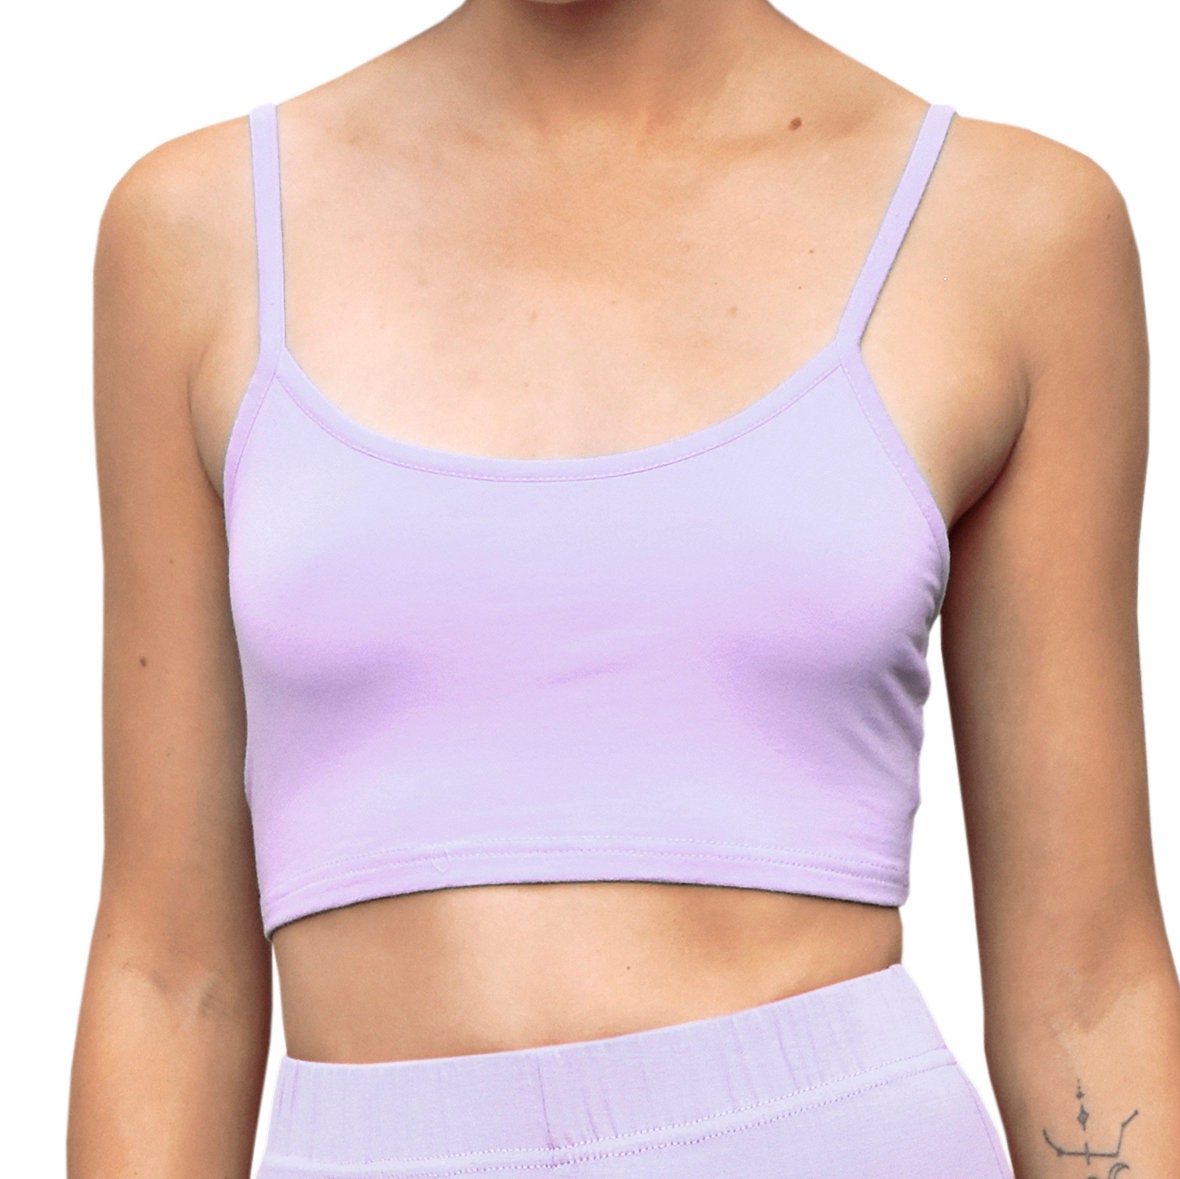 Mix Spaghetti N Purple Etsy Match Top Crop Cropped Strap Solid Cami Tank - Lavender